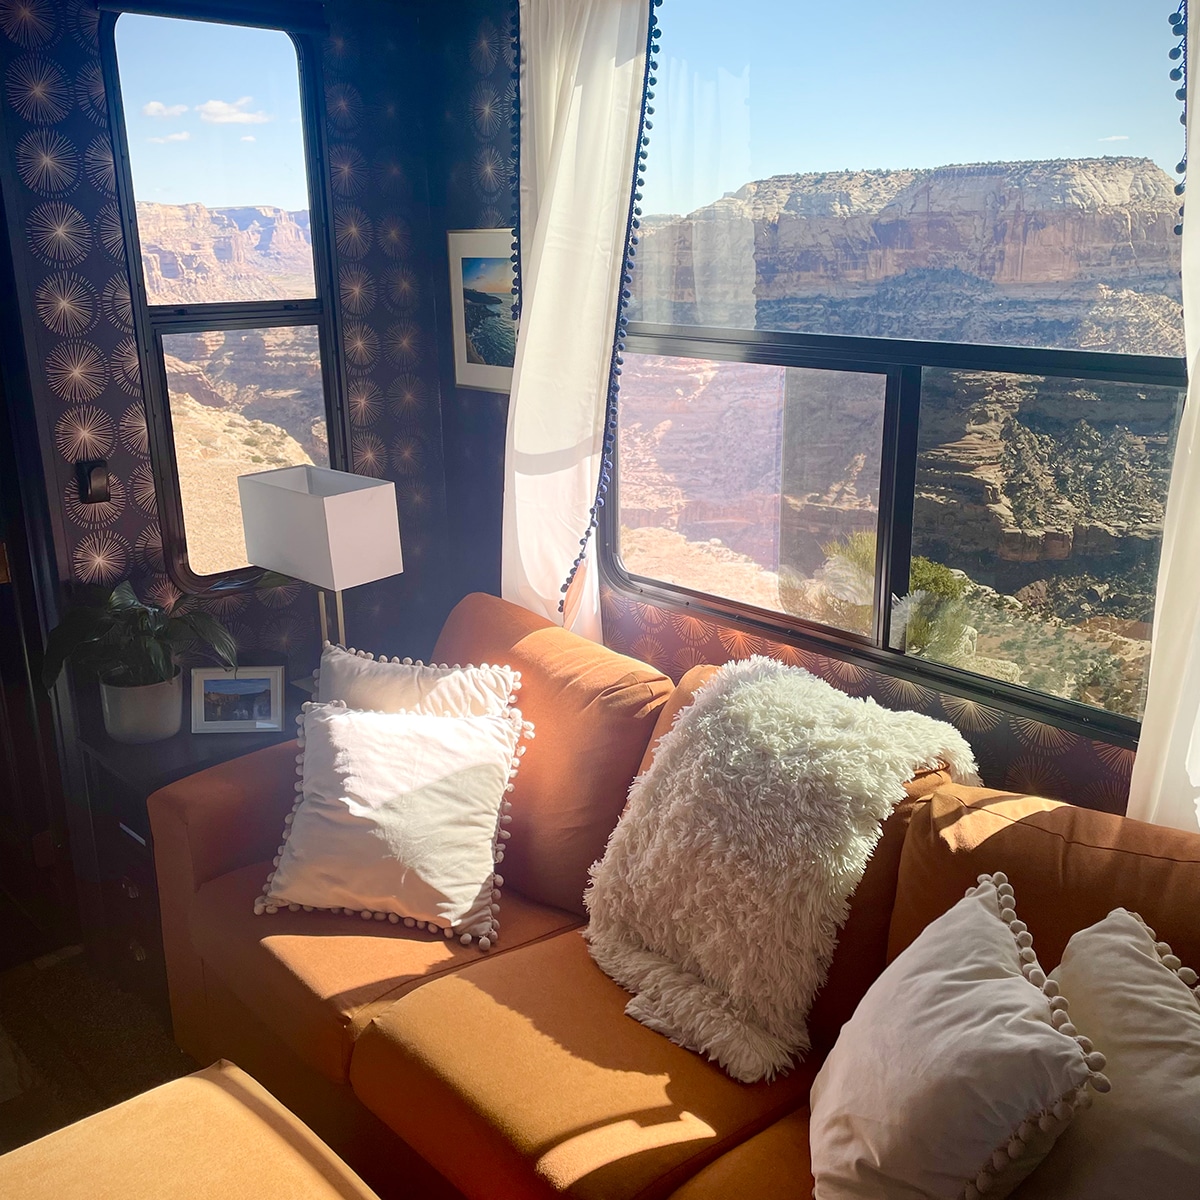 The living room area inside our RV with a gorgeous view of the Little Grand Canyon outside the window behind our sofa.